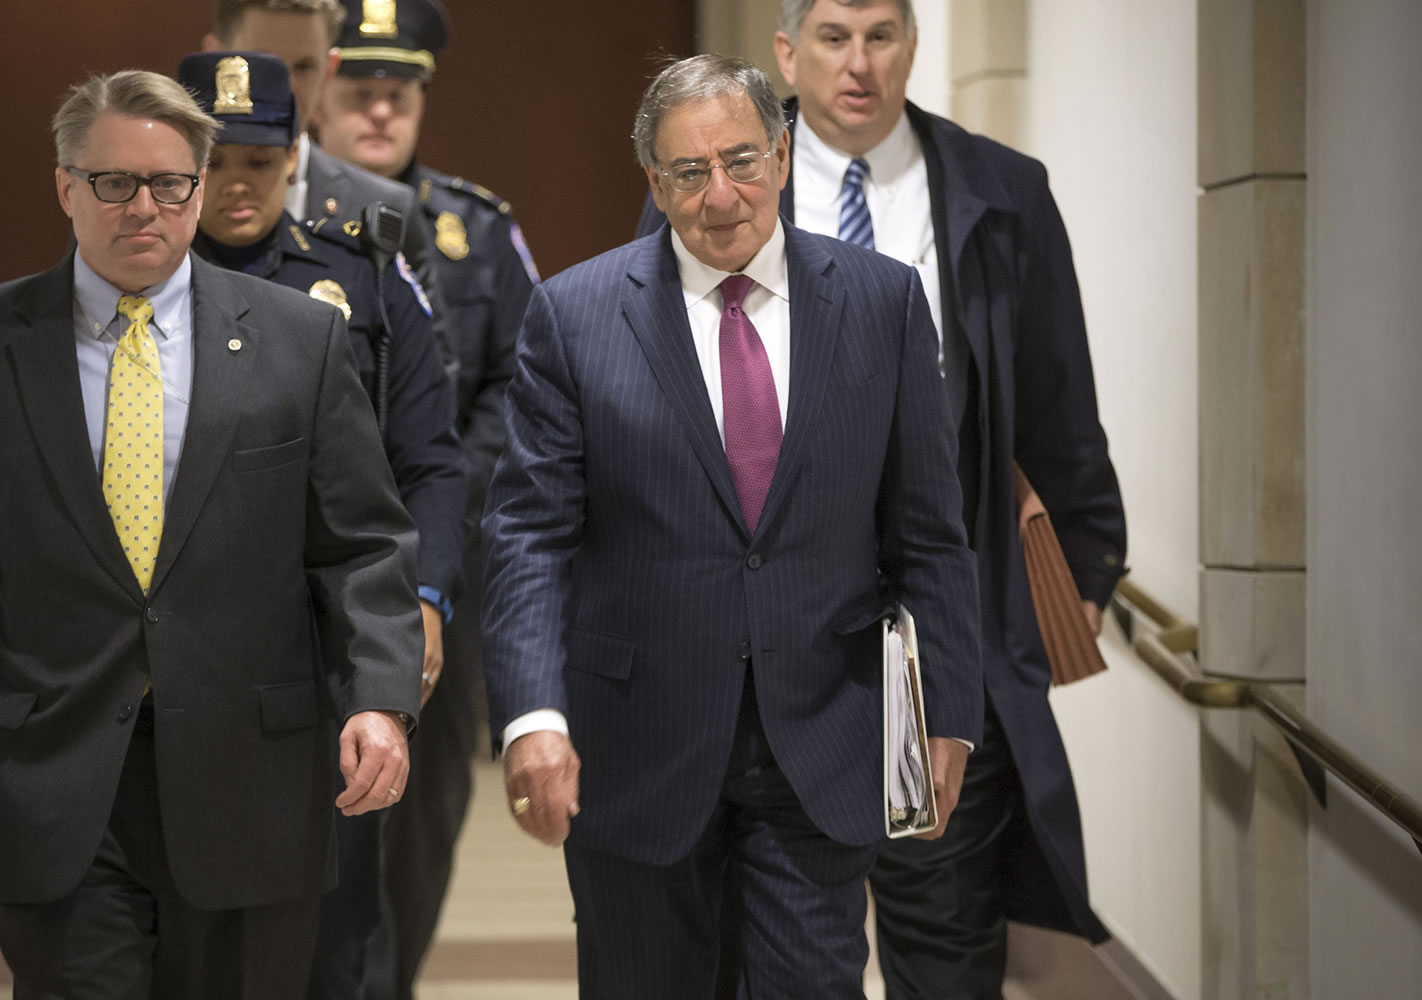 Former Defense Secretary Leon Panetta, center, is escorted to a secure floor on Capitol Hill in Washington, Friday, Jan. 8, 2016, to be questioned in a closed-door hearing of the House Benghazi Committee. The panel, chaired by Rep. Trey Gowdy, R-S.C., is investigating the 2012 attacks on the U.S. consulate in Benghazi, Libya, where a violent mob killed four Americans, including Ambassador Christopher Stevens.  (AP Photo/J.